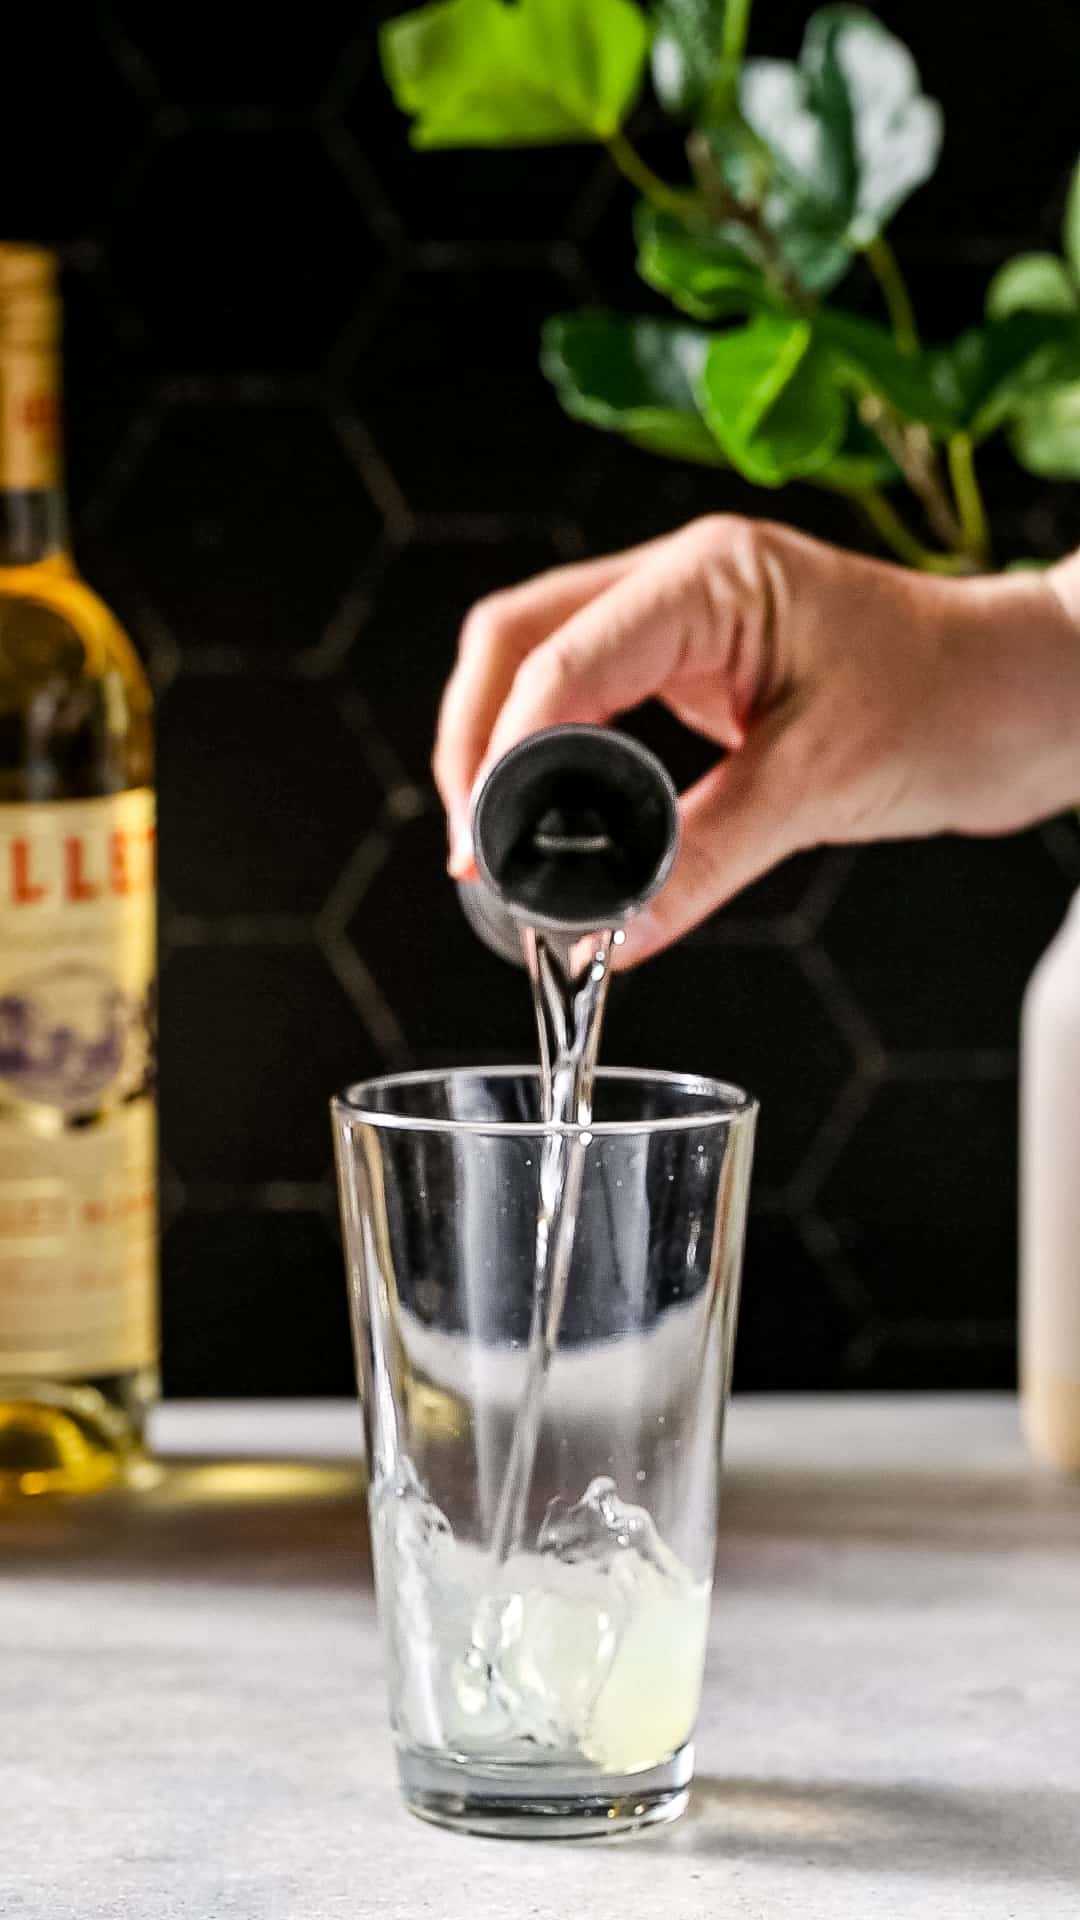 Hand adding gin from a jigger into a cocktail shaker.